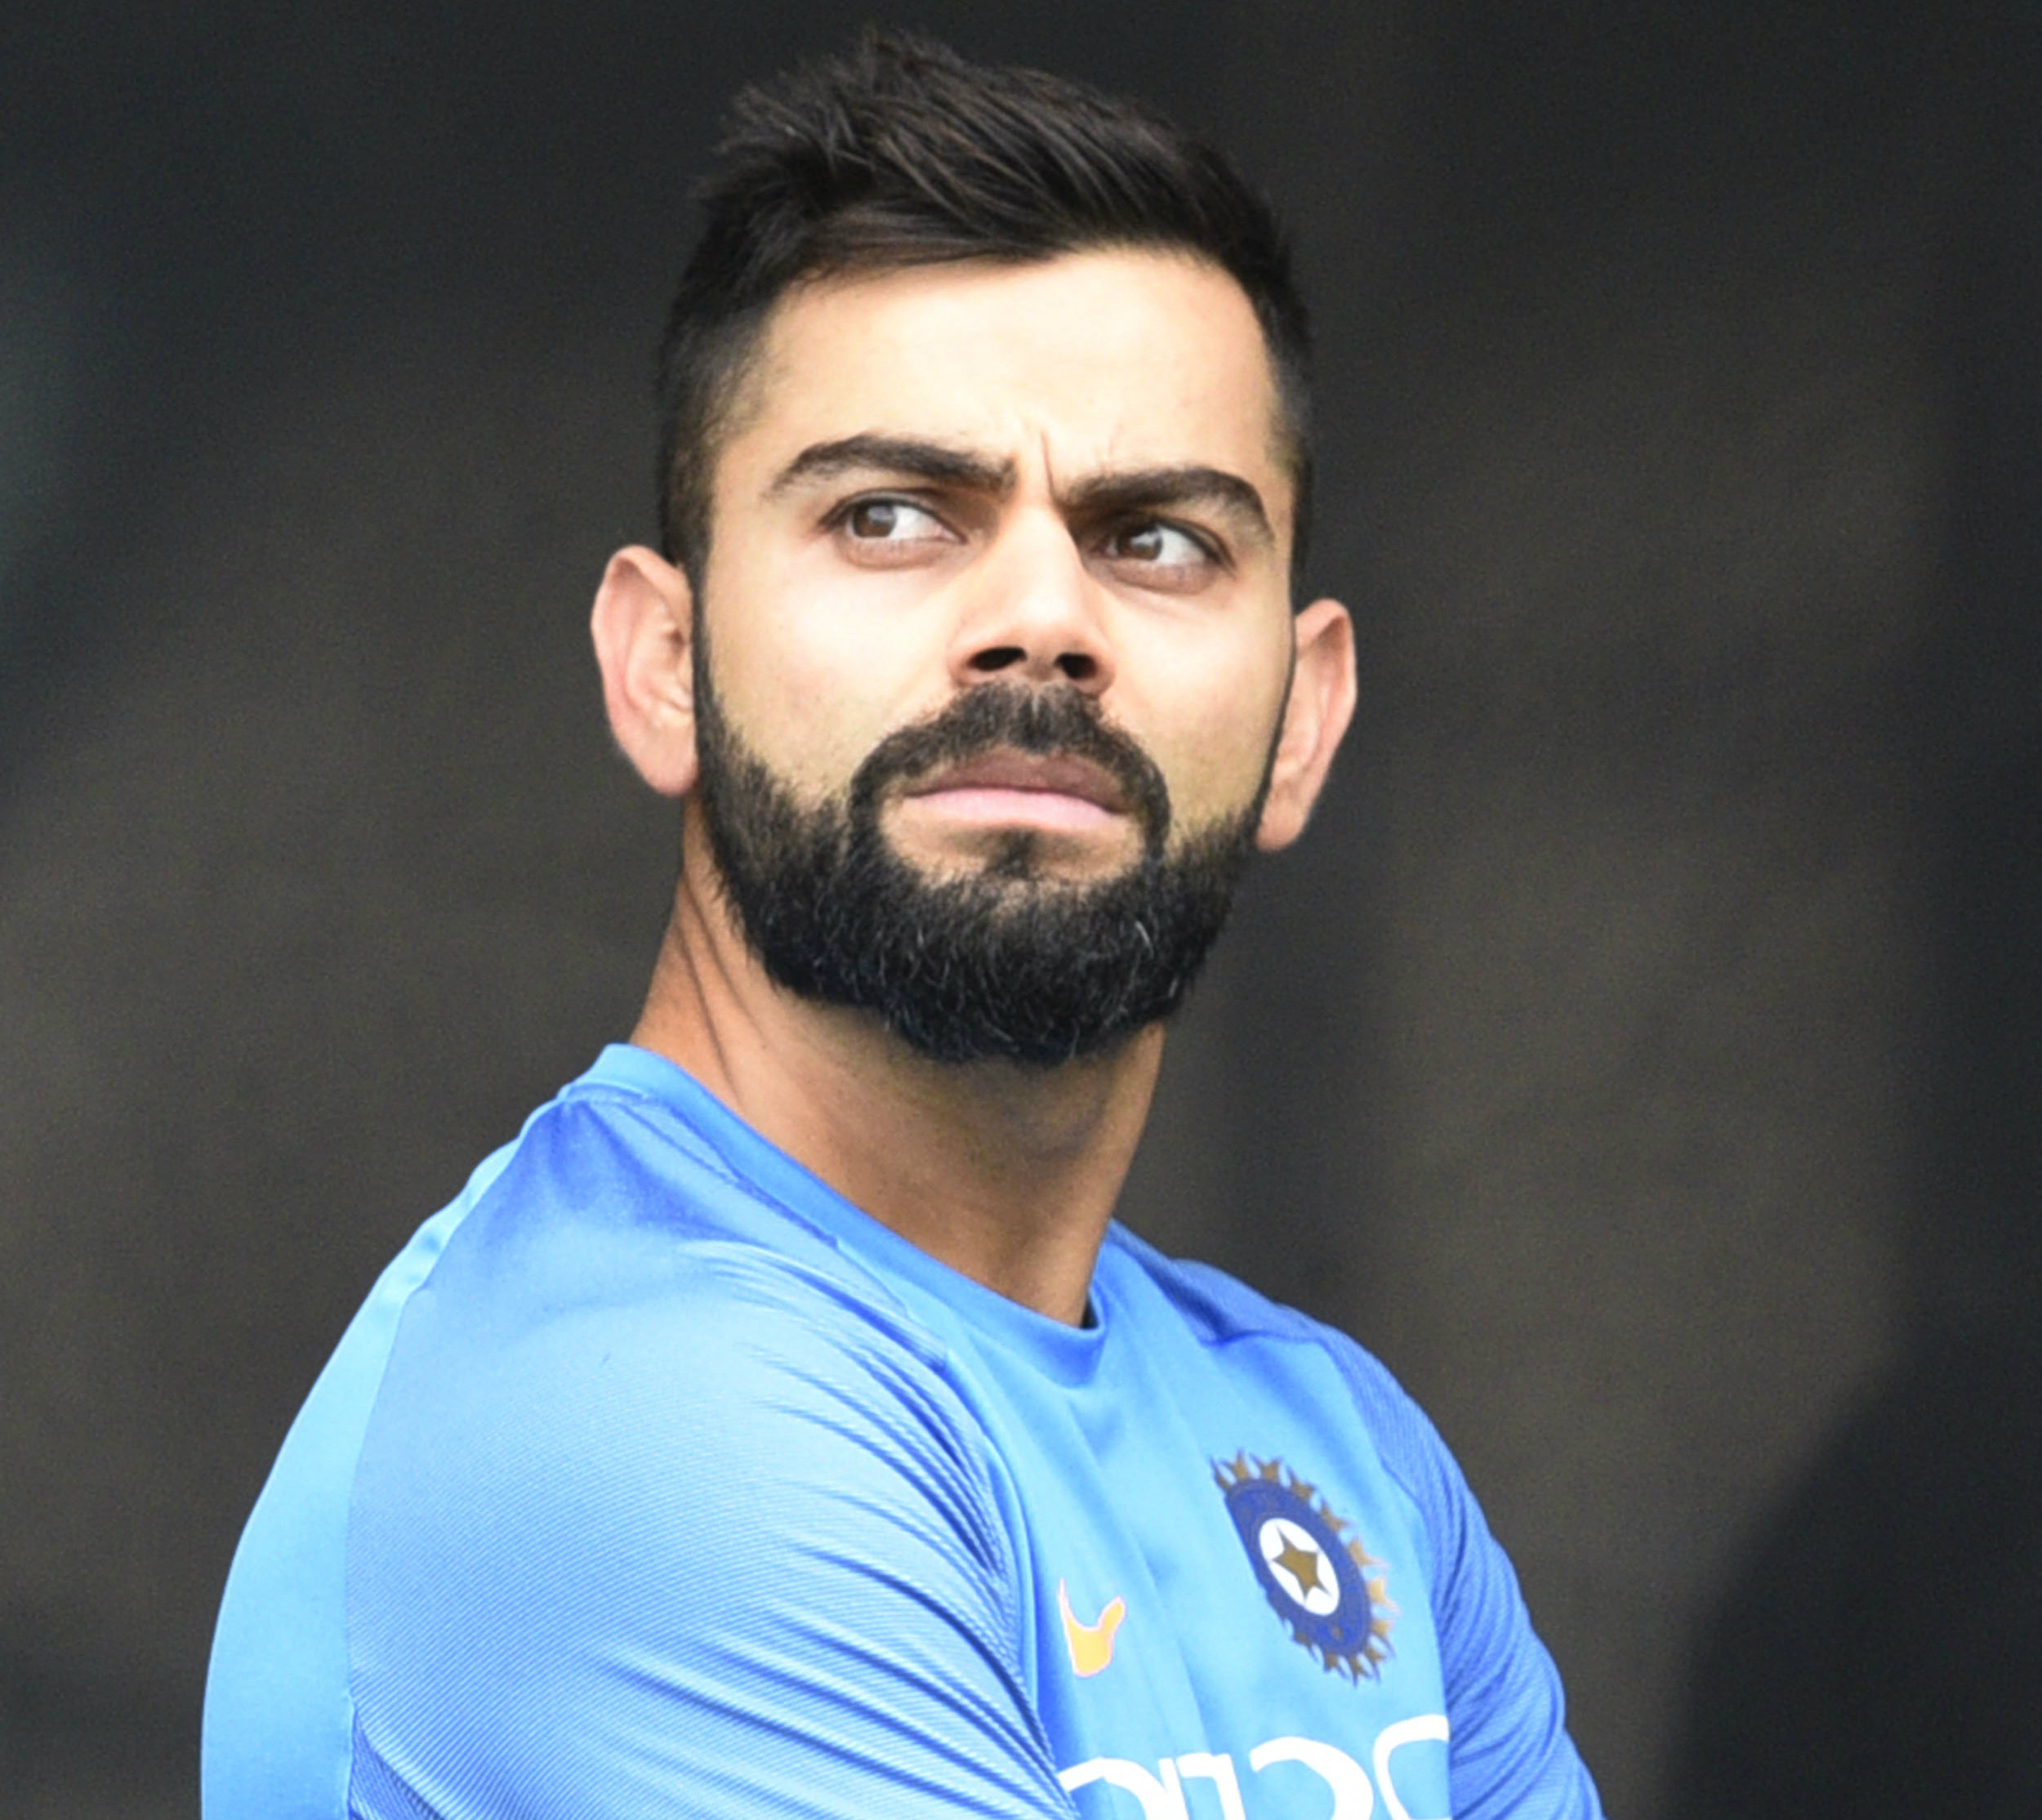 On Wednesday, Kohli had told off a fan who said he liked to watch English and Australian batsmen more than Indians.